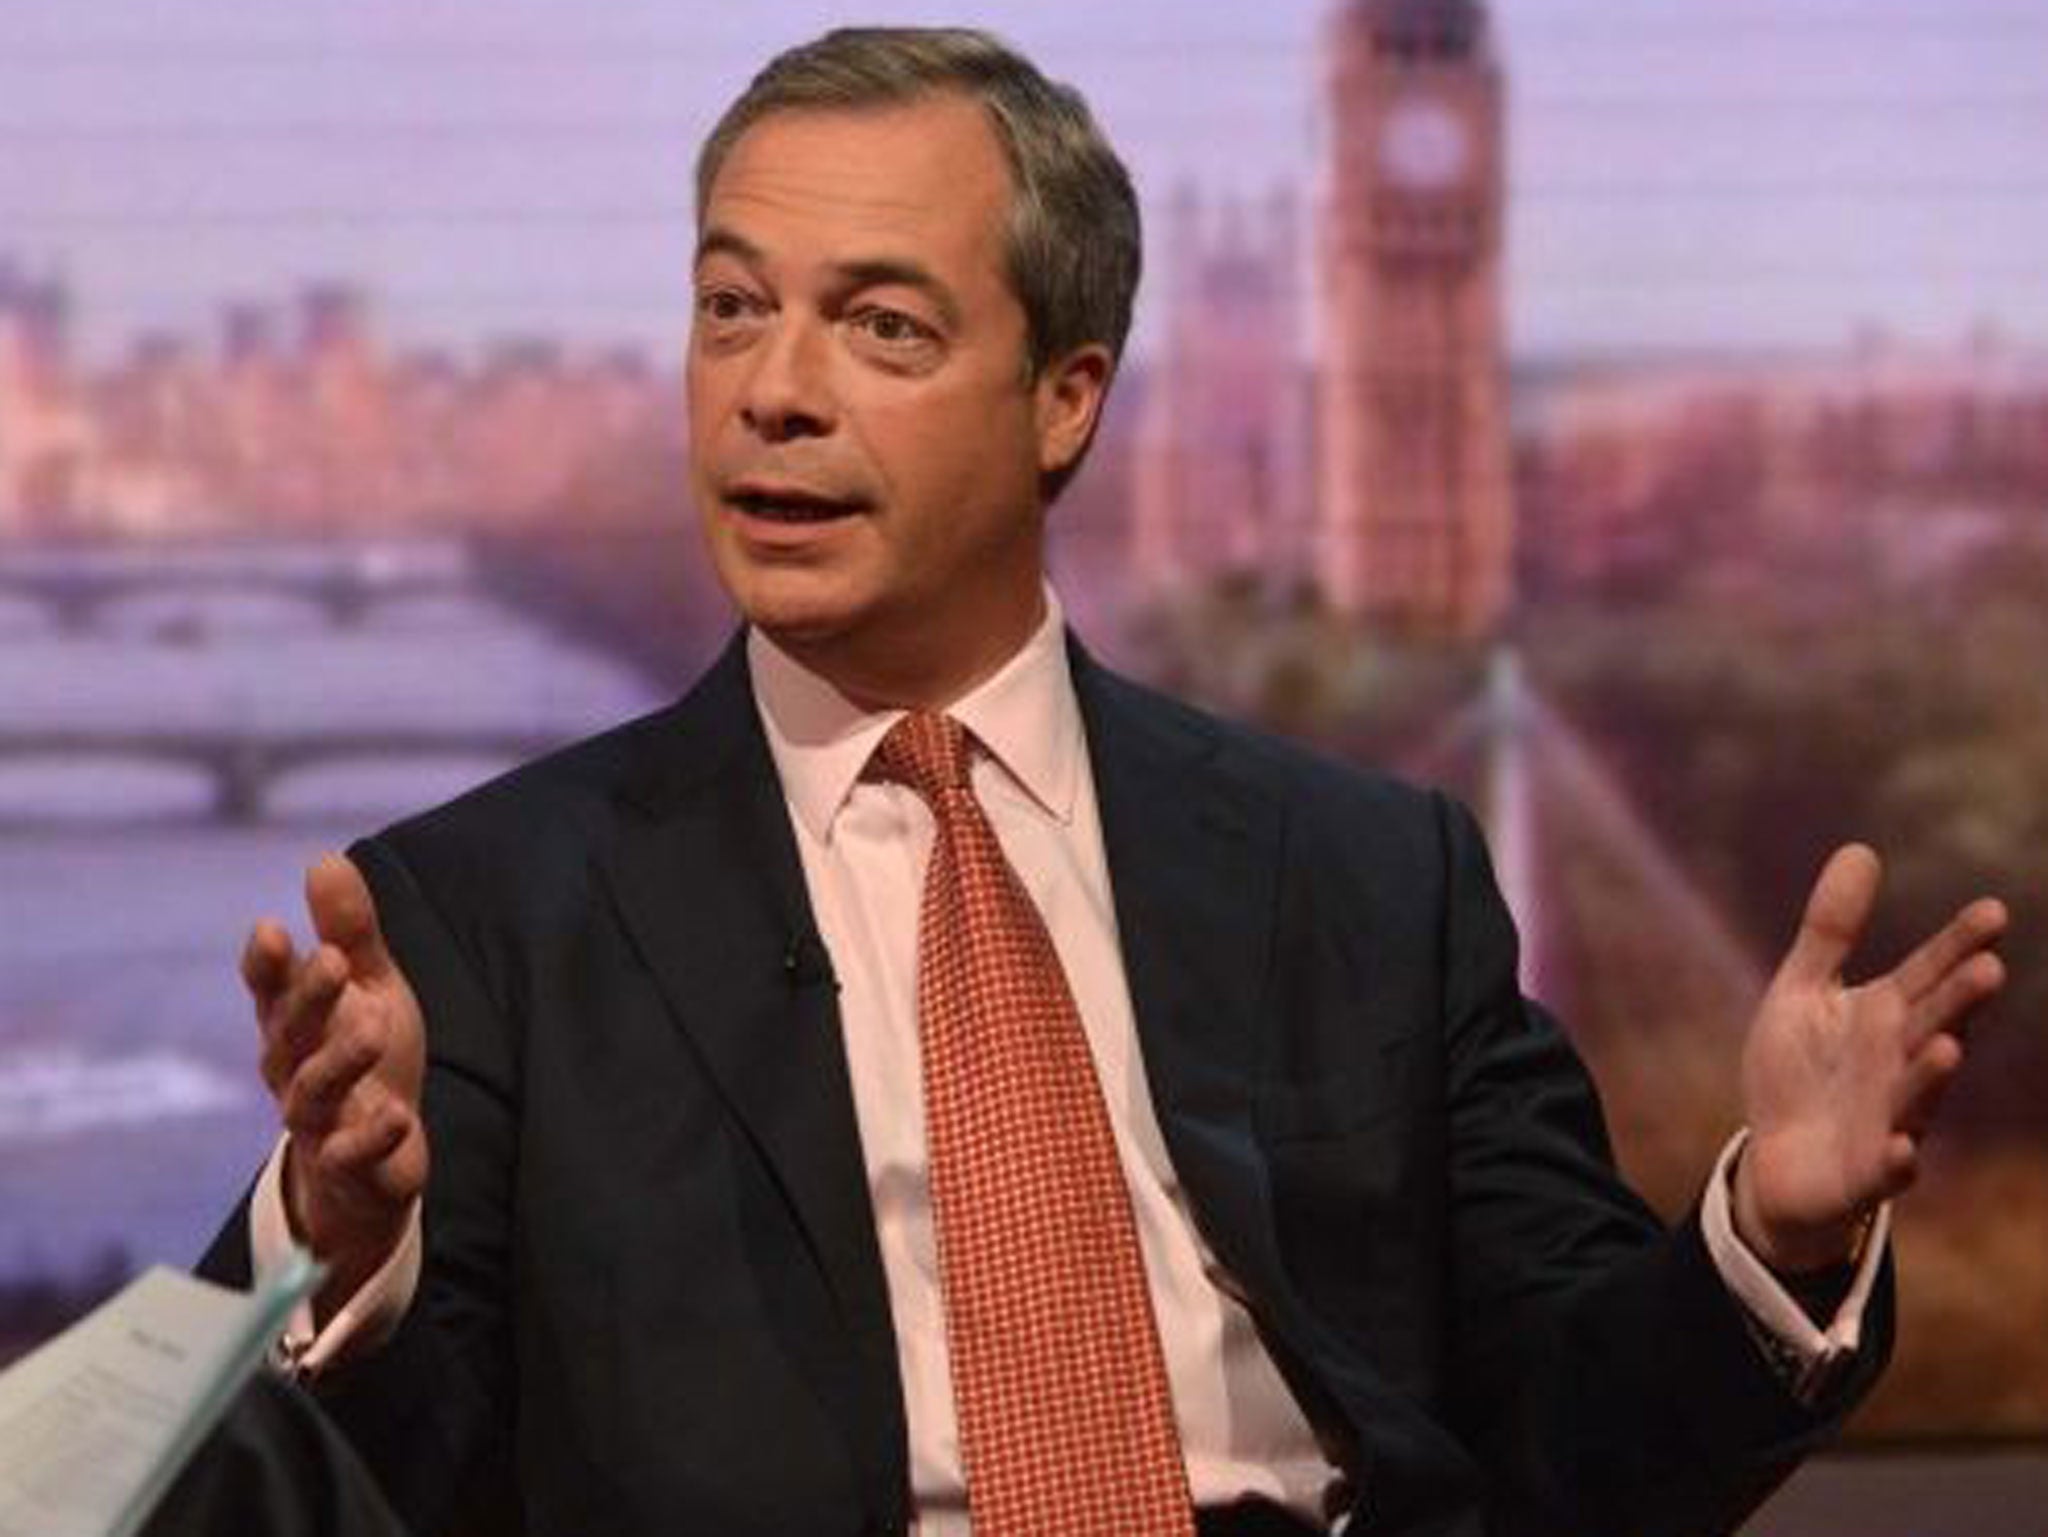 UKIP leader Nigel Farage confirmed he will stand in the 2015 general election